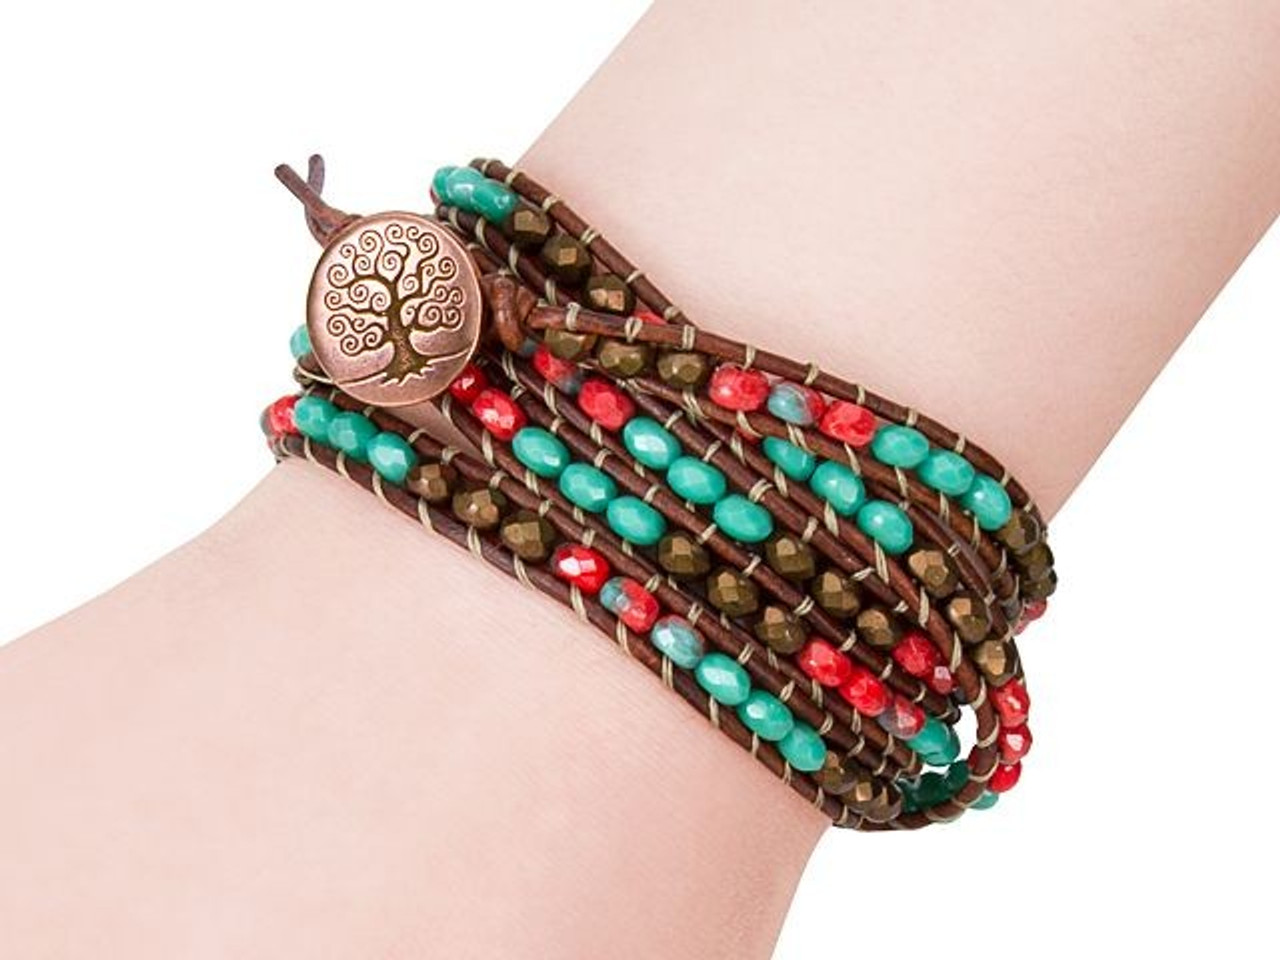 Thread Wrapping Combination with Bead Wrapped Cord Bracelet Adds